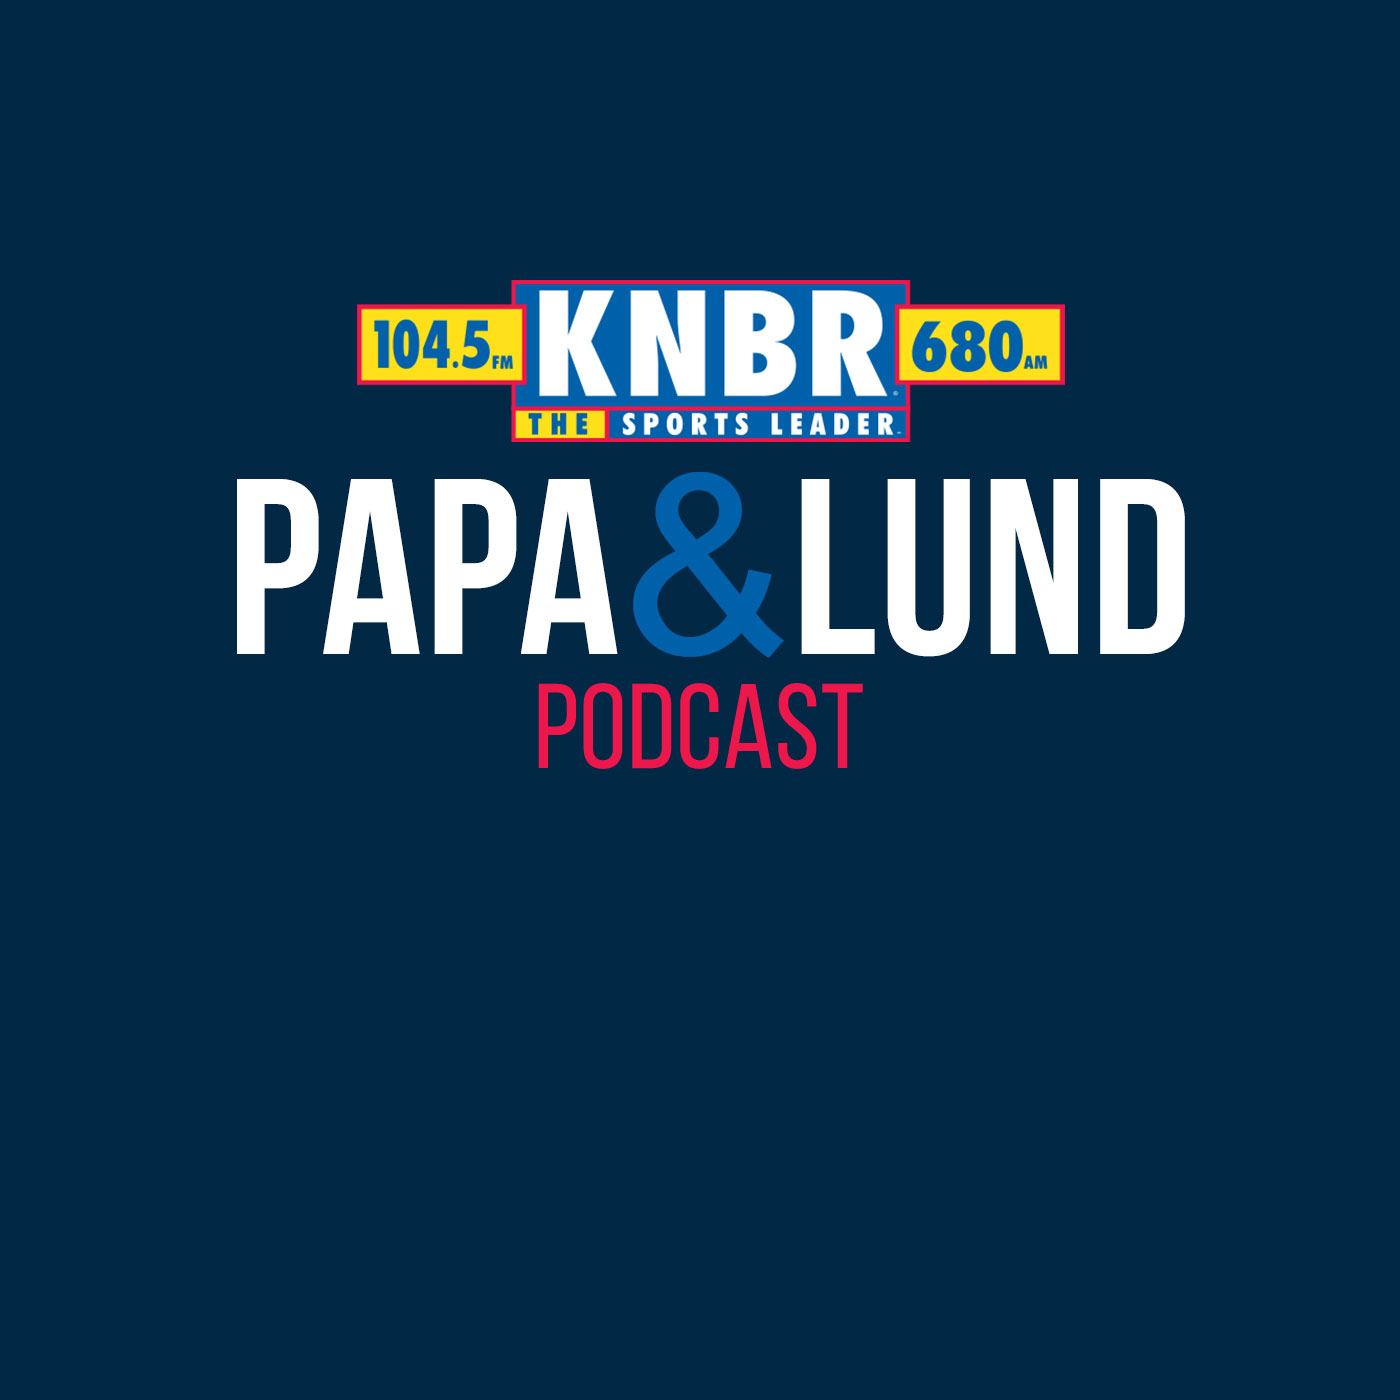 7-10 Bobby Marks joins Benz & Lund to discuss the Warriors offseason moves, not helping this year in particular but how it sets up the Warriors really well in the near future